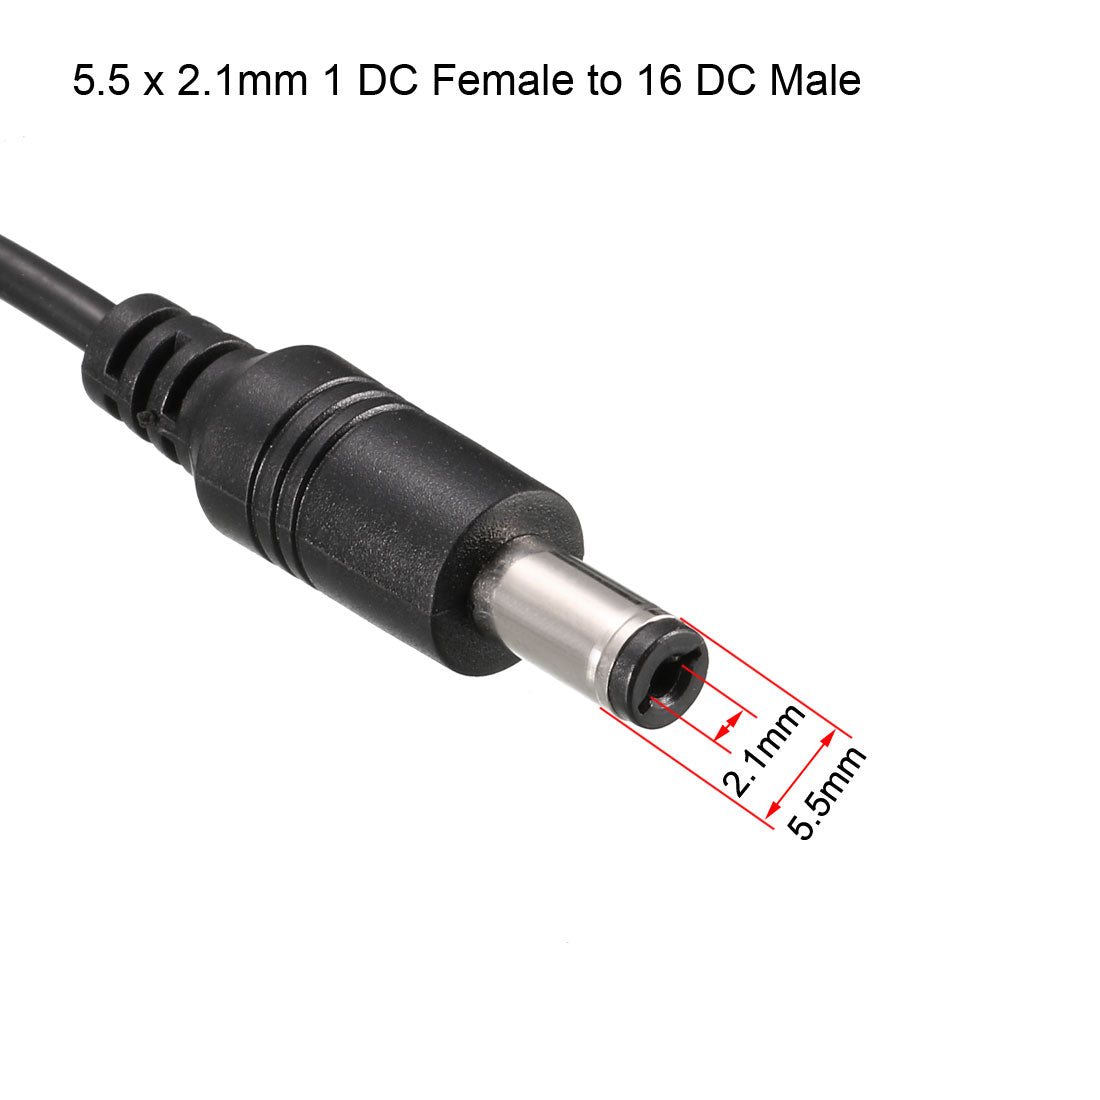 uxcell Uxcell 1 DC Female to 16 DC Male 5.5 x 2.1mm Power Extension Wire For CCTV Camera